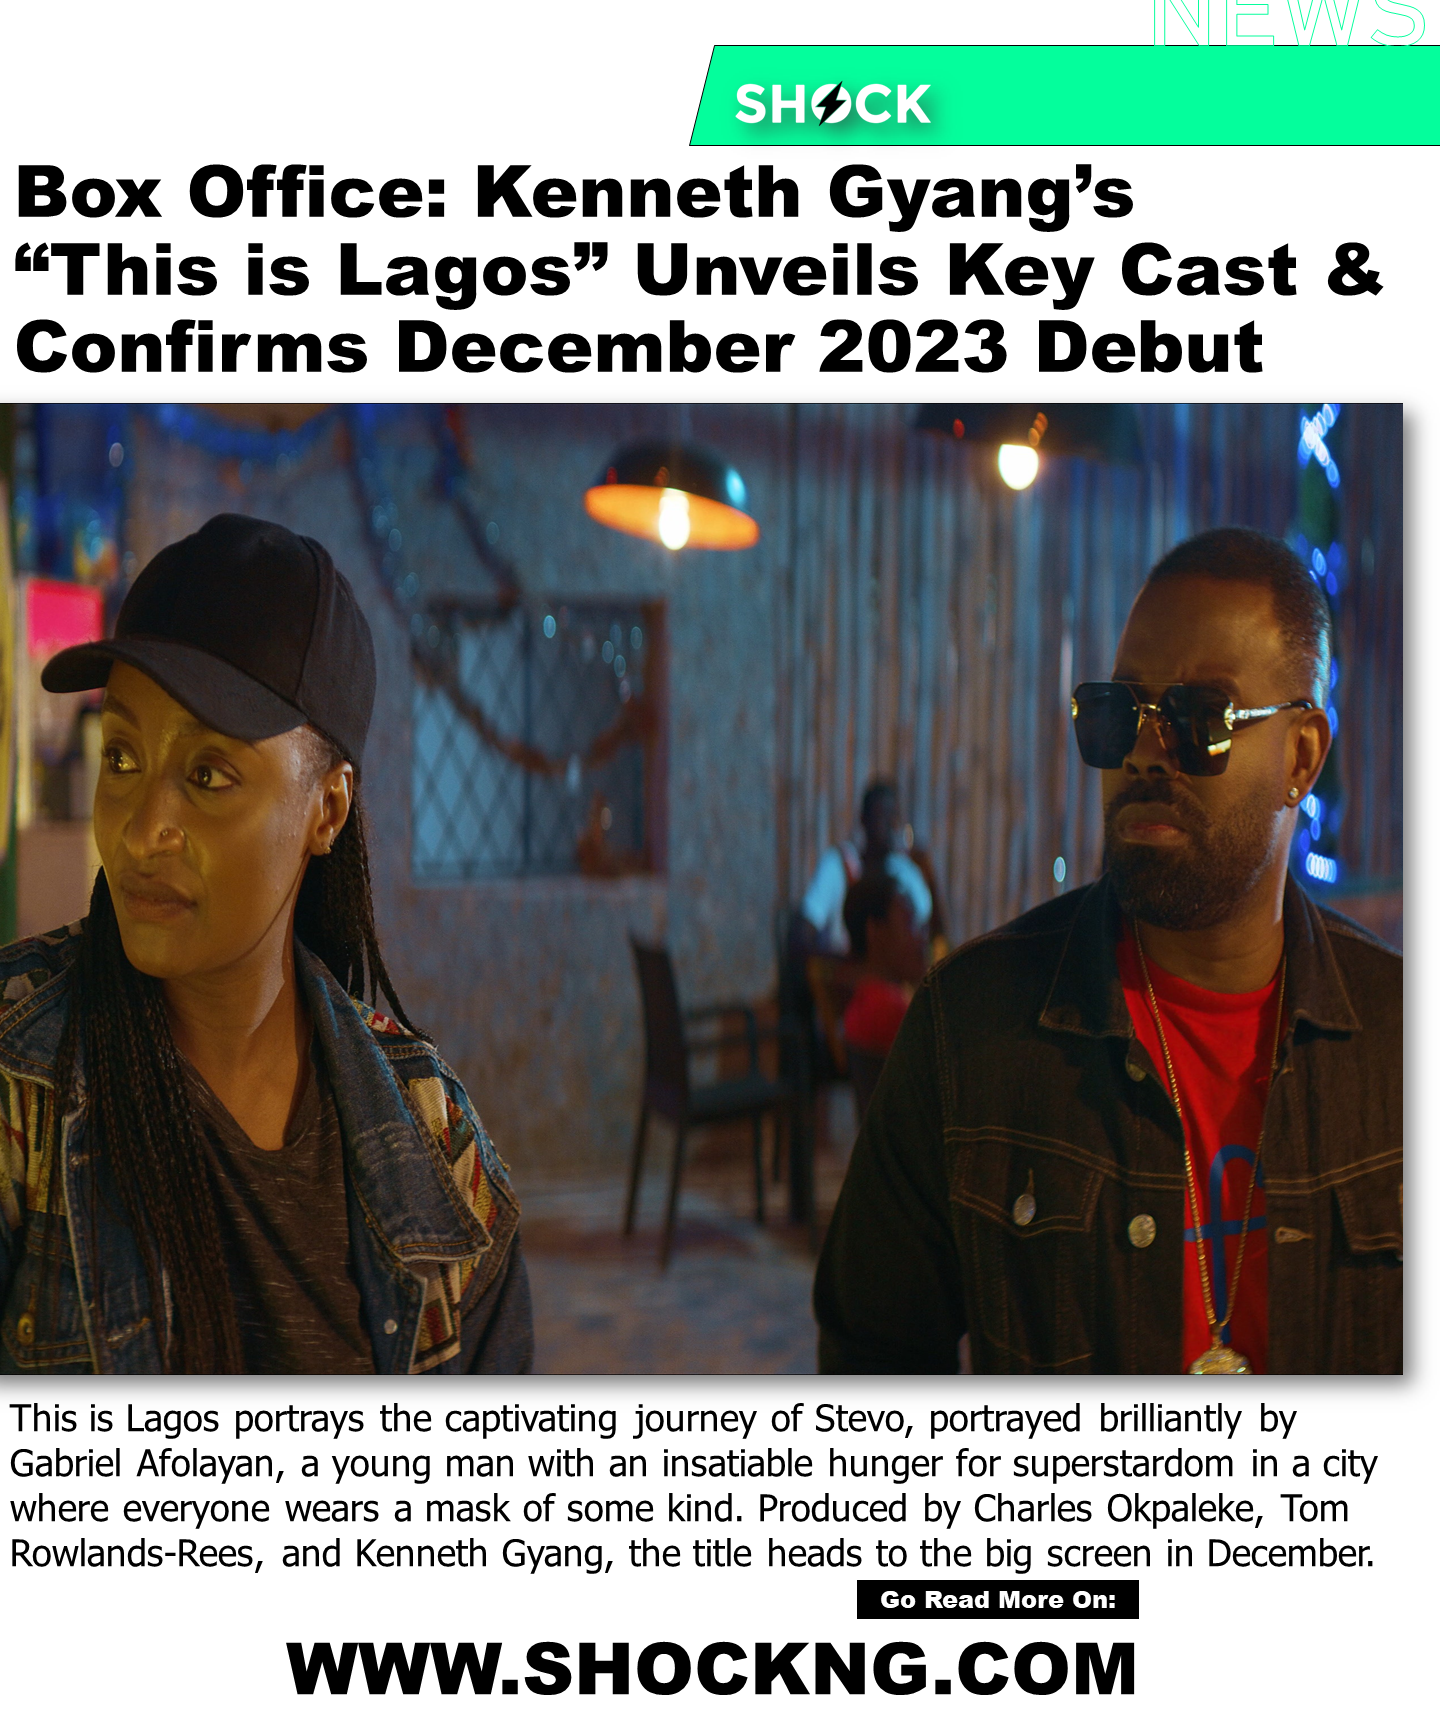 This is lagos movie - Kenneth Gyang’s “This is Lagos” Unveils Key Cast & Confirms December 2023 Debut (EXCLUSIVE)